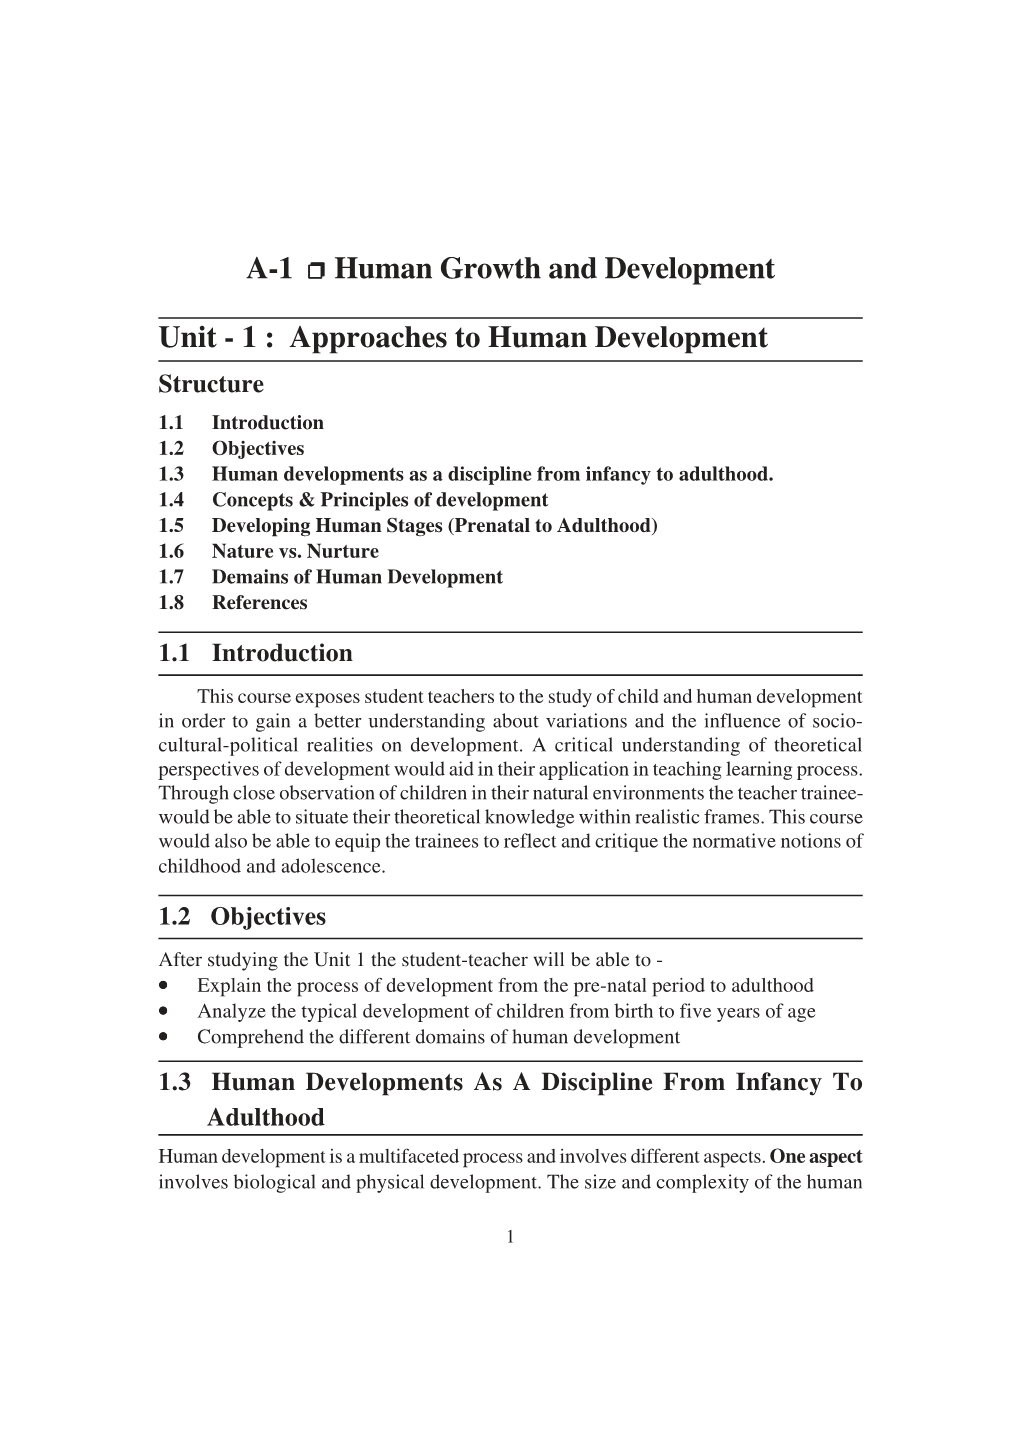 A-1 Human Growth and Development Unit